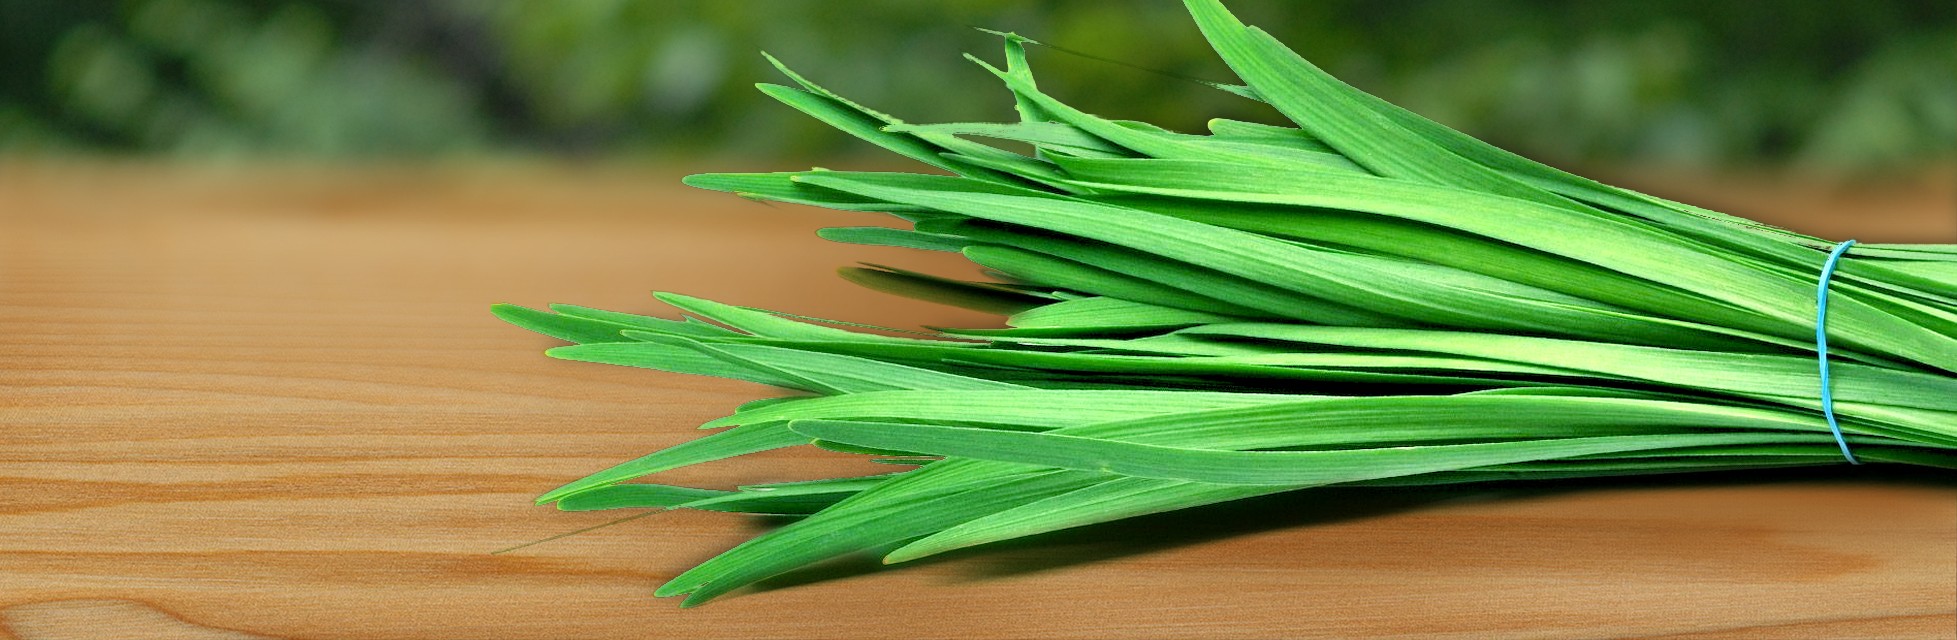 Chinese Chives